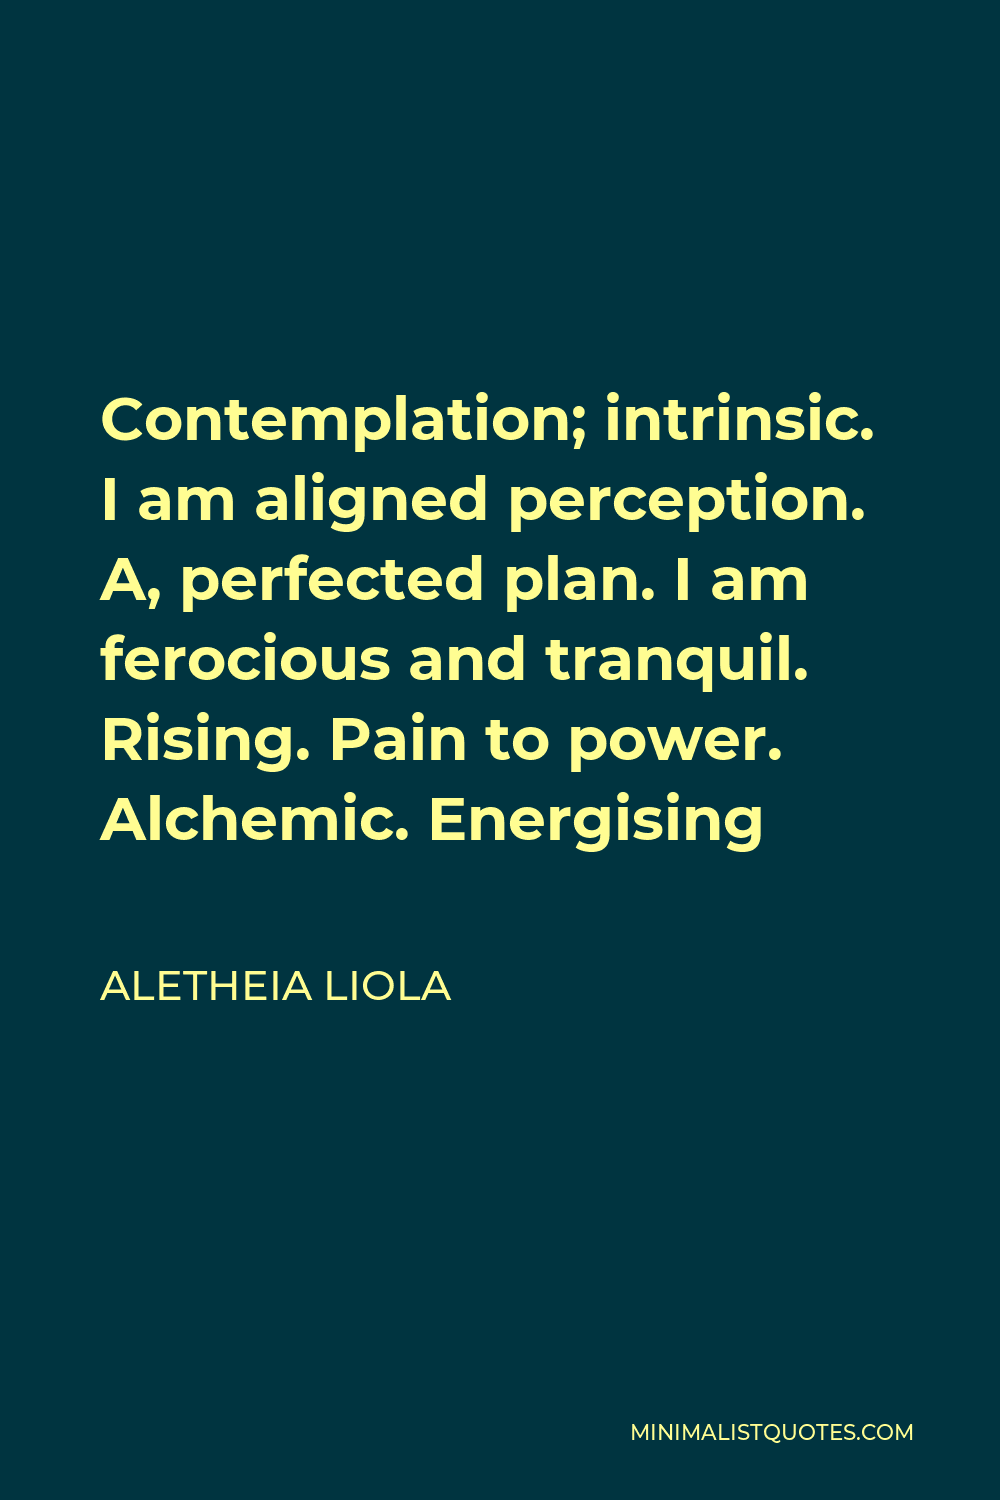 Aletheia Liola Quote - Contemplation; intrinsic. I am aligned perception. A, perfected plan. I am ferocious and tranquil. Rising. Pain to power. Alchemic. Energising